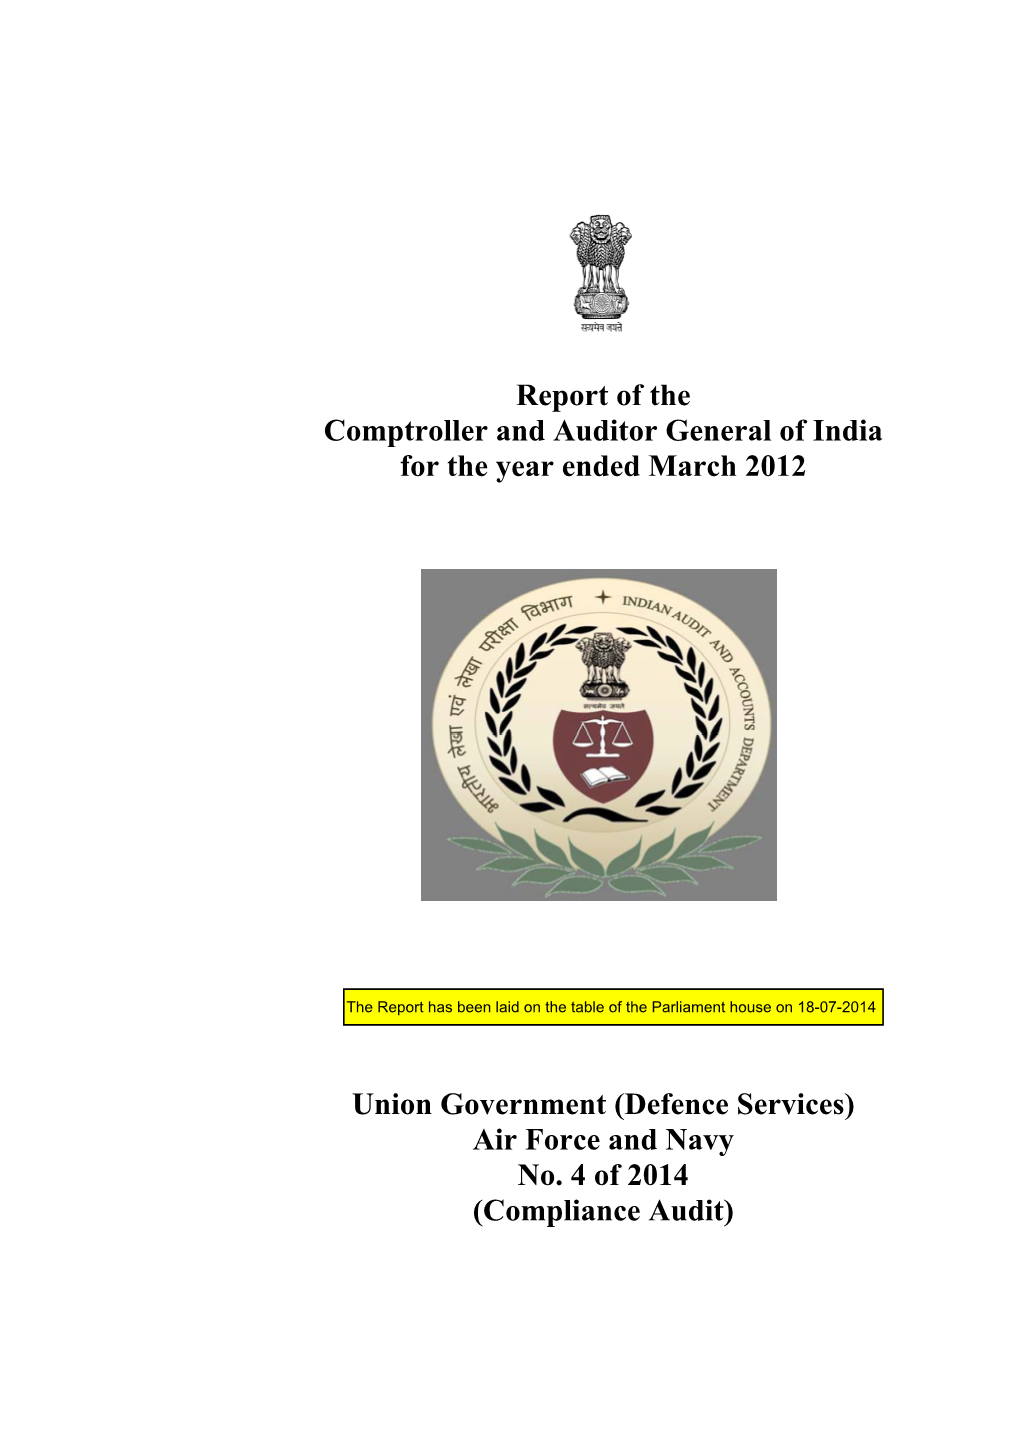 (Defence Services), Air Force and Navy,Compliance Audit